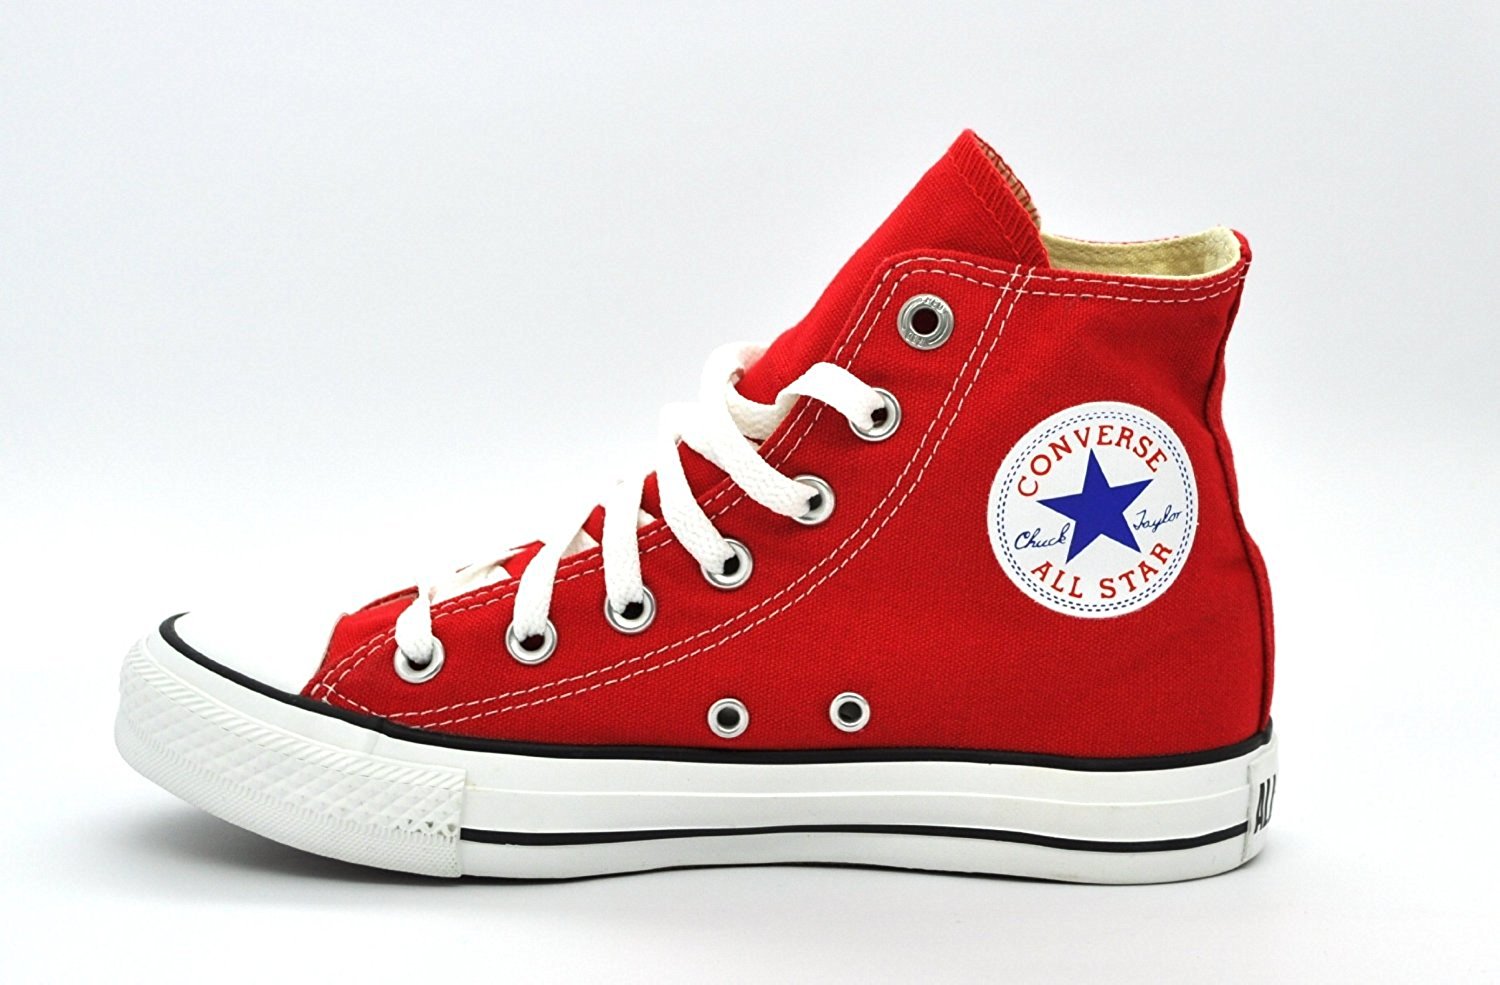 red converse amazon.com | converse unisex high top sneakers red m9621 9.5 | fashion  sneakers QNKYDVO